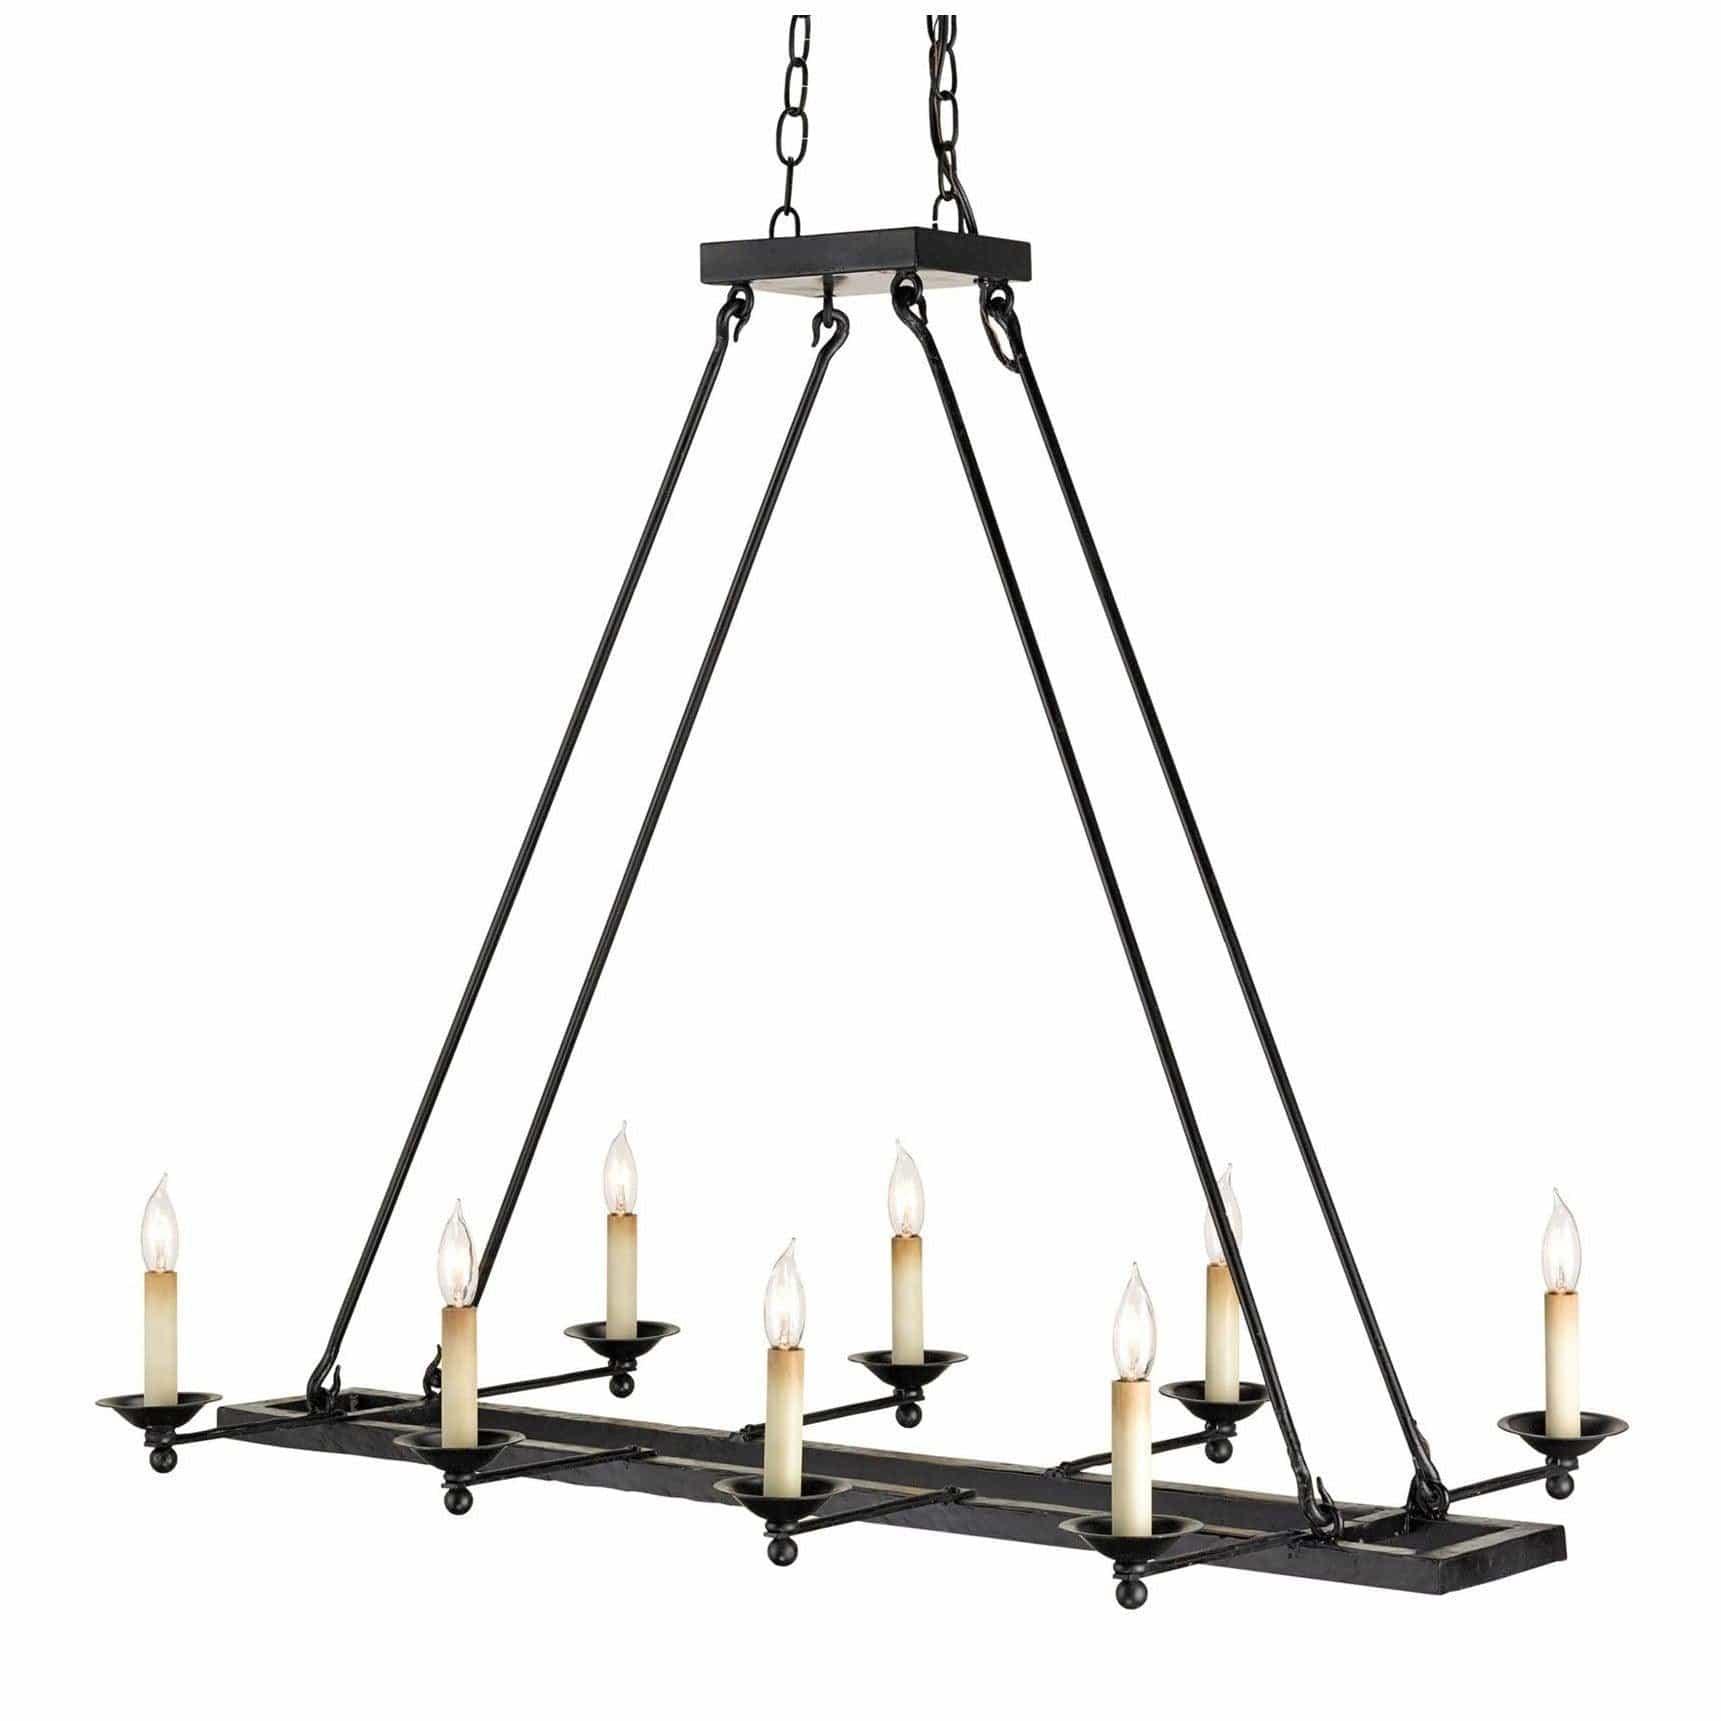 Currey and Company - Houndslow Chandelier - 9816 | Montreal Lighting & Hardware